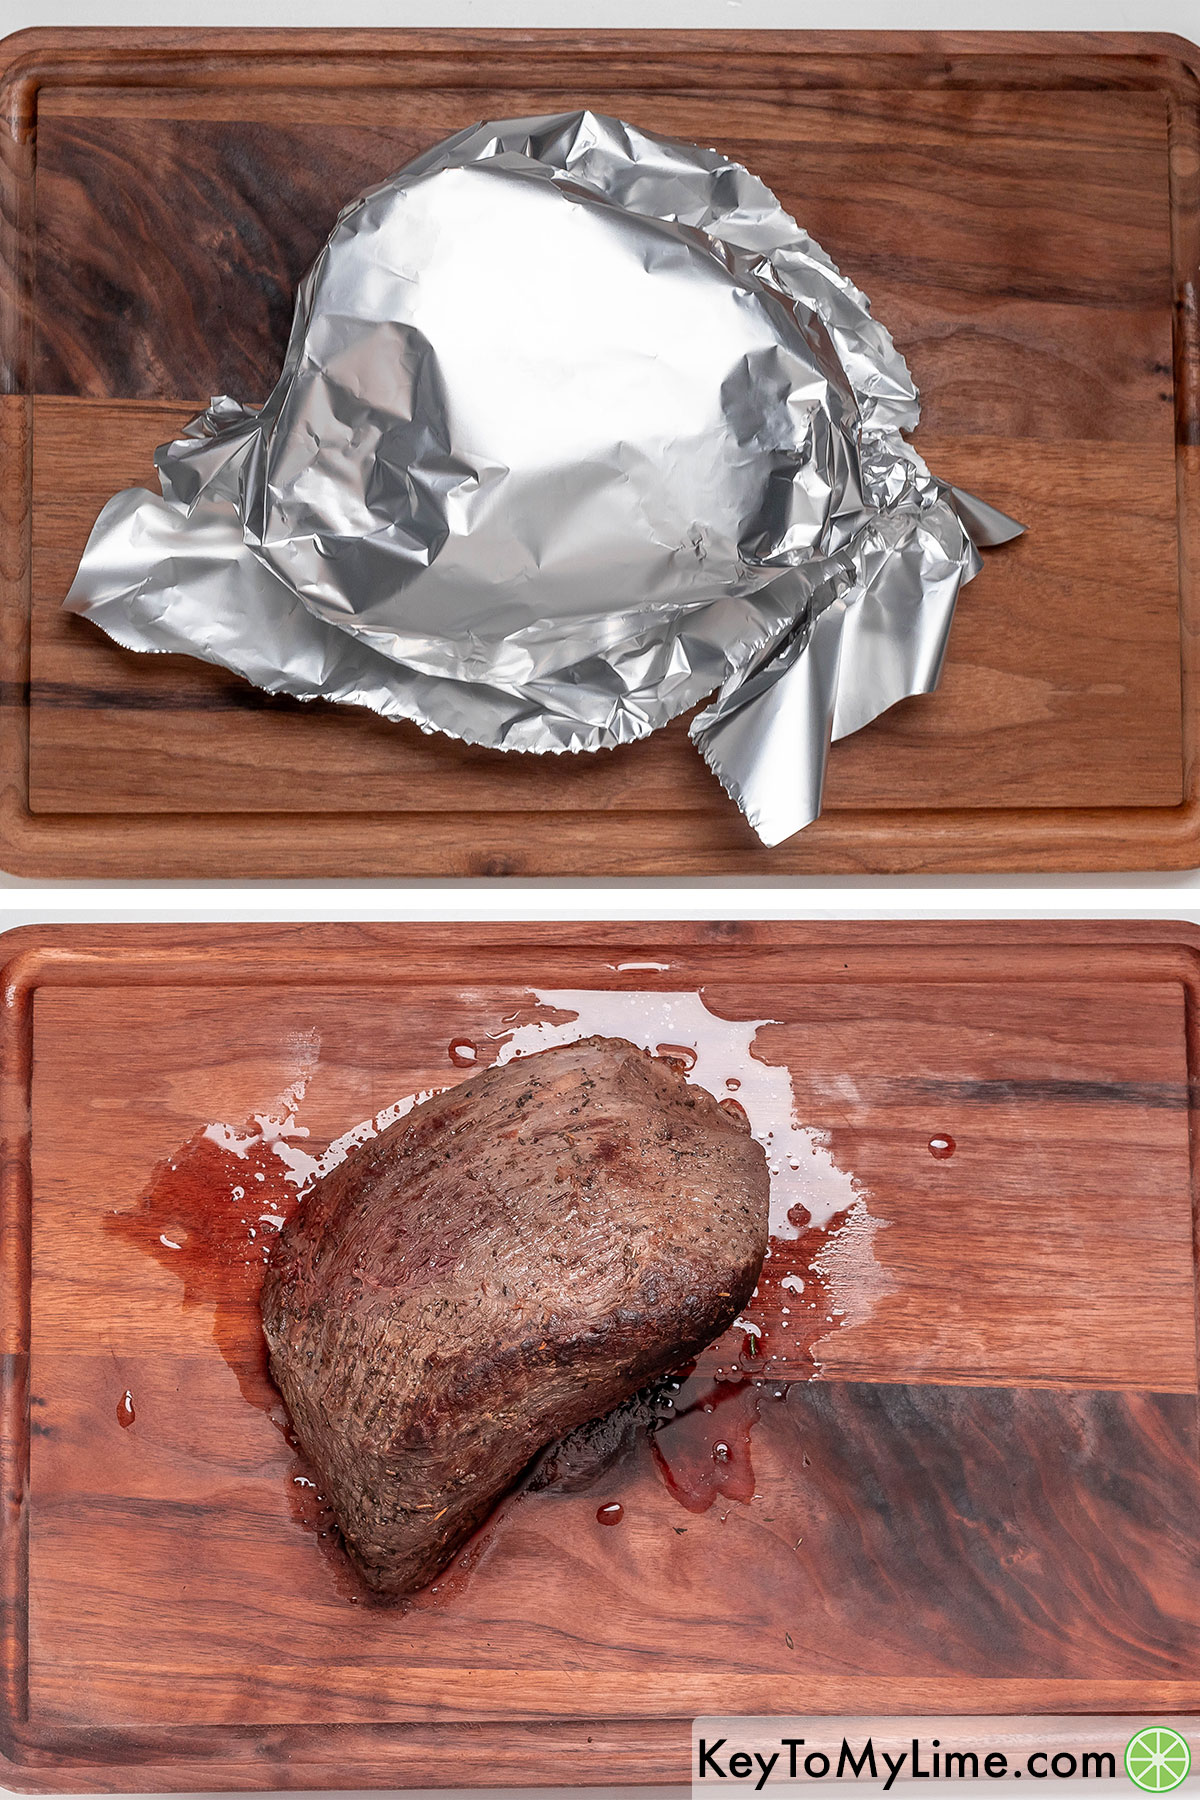 Tenting the sirloin with aluminum foil on a cutting board and resting to reabsorb the juices.